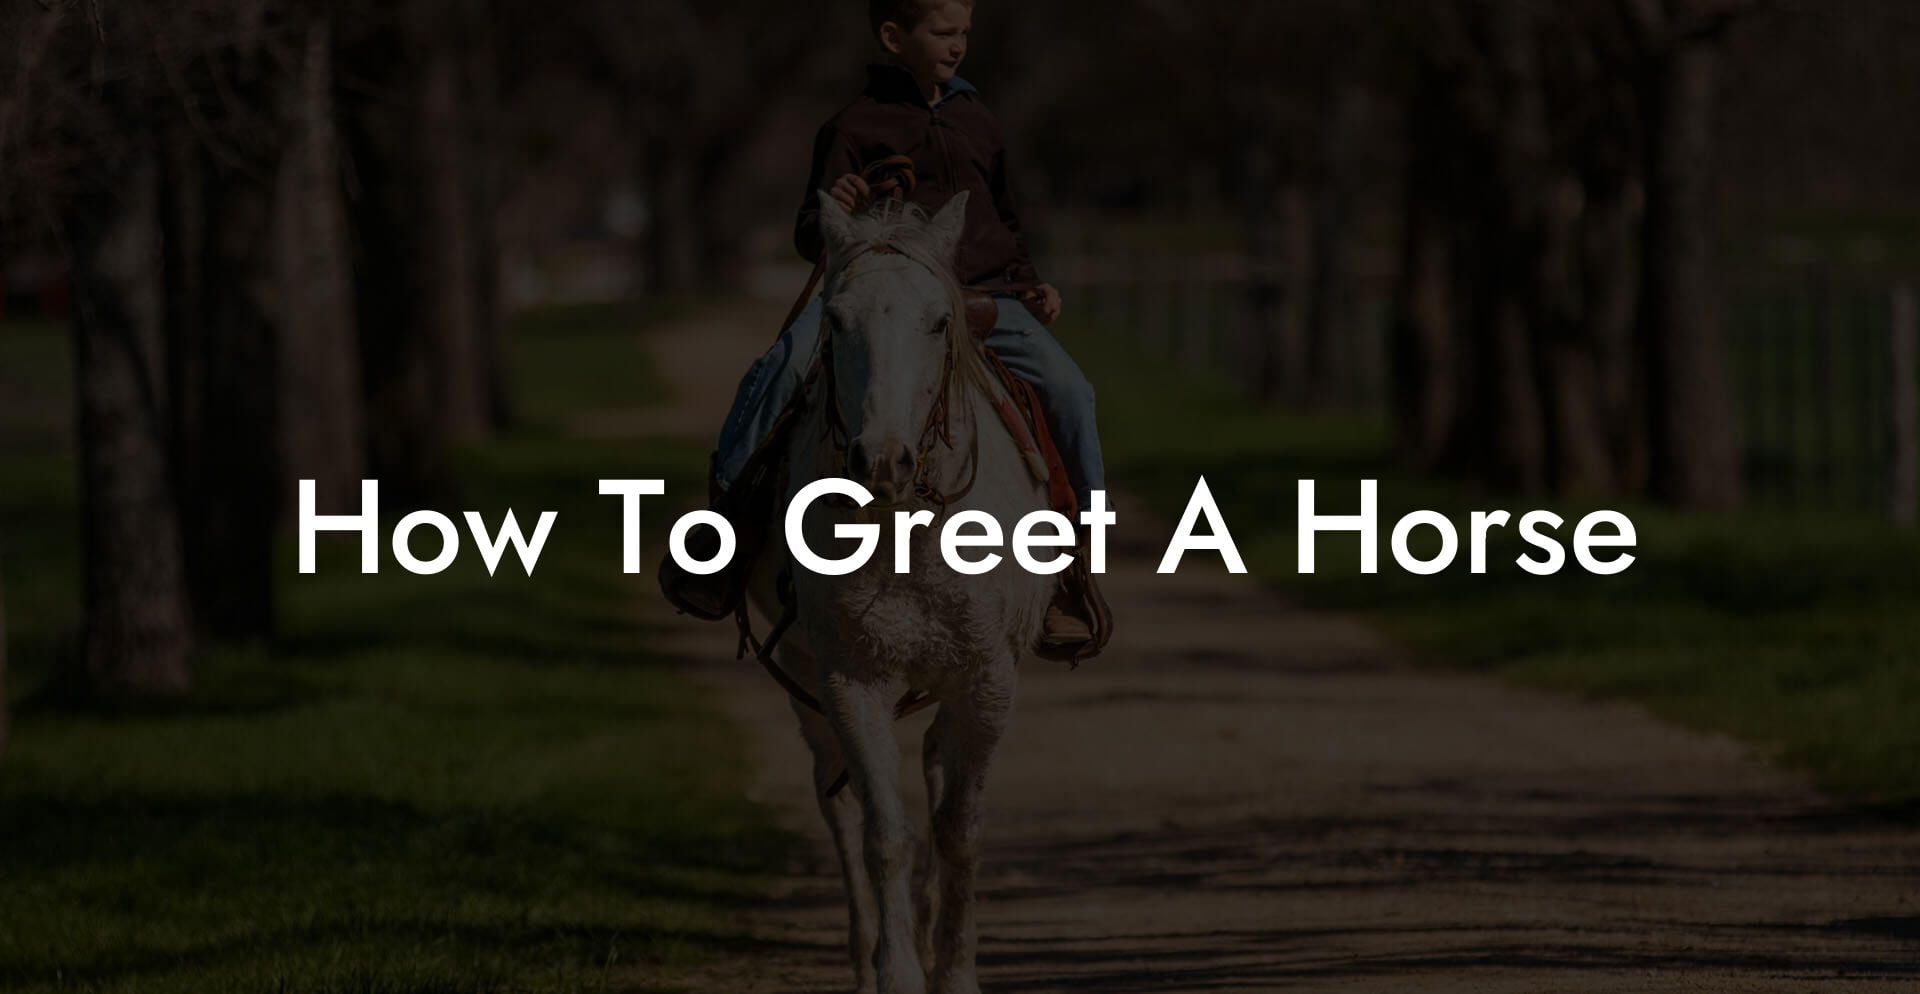 How To Greet A Horse